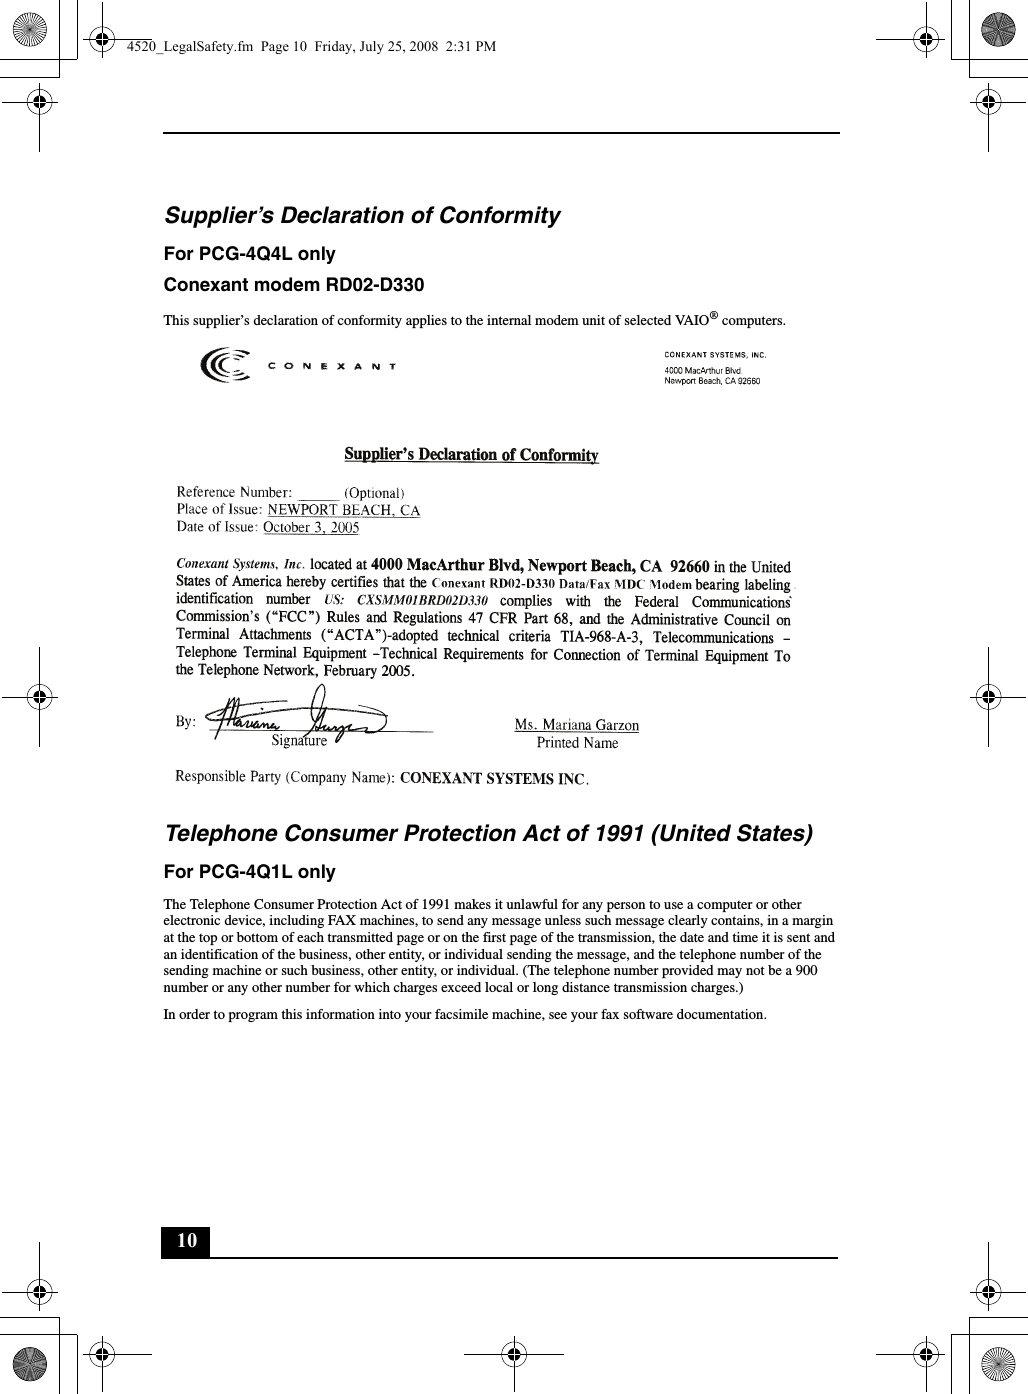 10Supplier’s Declaration of ConformityFor PCG-4Q4L onlyConexant modem RD02-D330This supplier’s declaration of conformity applies to the internal modem unit of selected VAIO® computers.Telephone Consumer Protection Act of 1991 (United States) For PCG-4Q1L onlyThe Telephone Consumer Protection Act of 1991 makes it unlawful for any person to use a computer or other electronic device, including FAX machines, to send any message unless such message clearly contains, in a margin at the top or bottom of each transmitted page or on the first page of the transmission, the date and time it is sent and an identification of the business, other entity, or individual sending the message, and the telephone number of the sending machine or such business, other entity, or individual. (The telephone number provided may not be a 900 number or any other number for which charges exceed local or long distance transmission charges.)In order to program this information into your facsimile machine, see your fax software documentation.4520_LegalSafety.fm  Page 10  Friday, July 25, 2008  2:31 PM